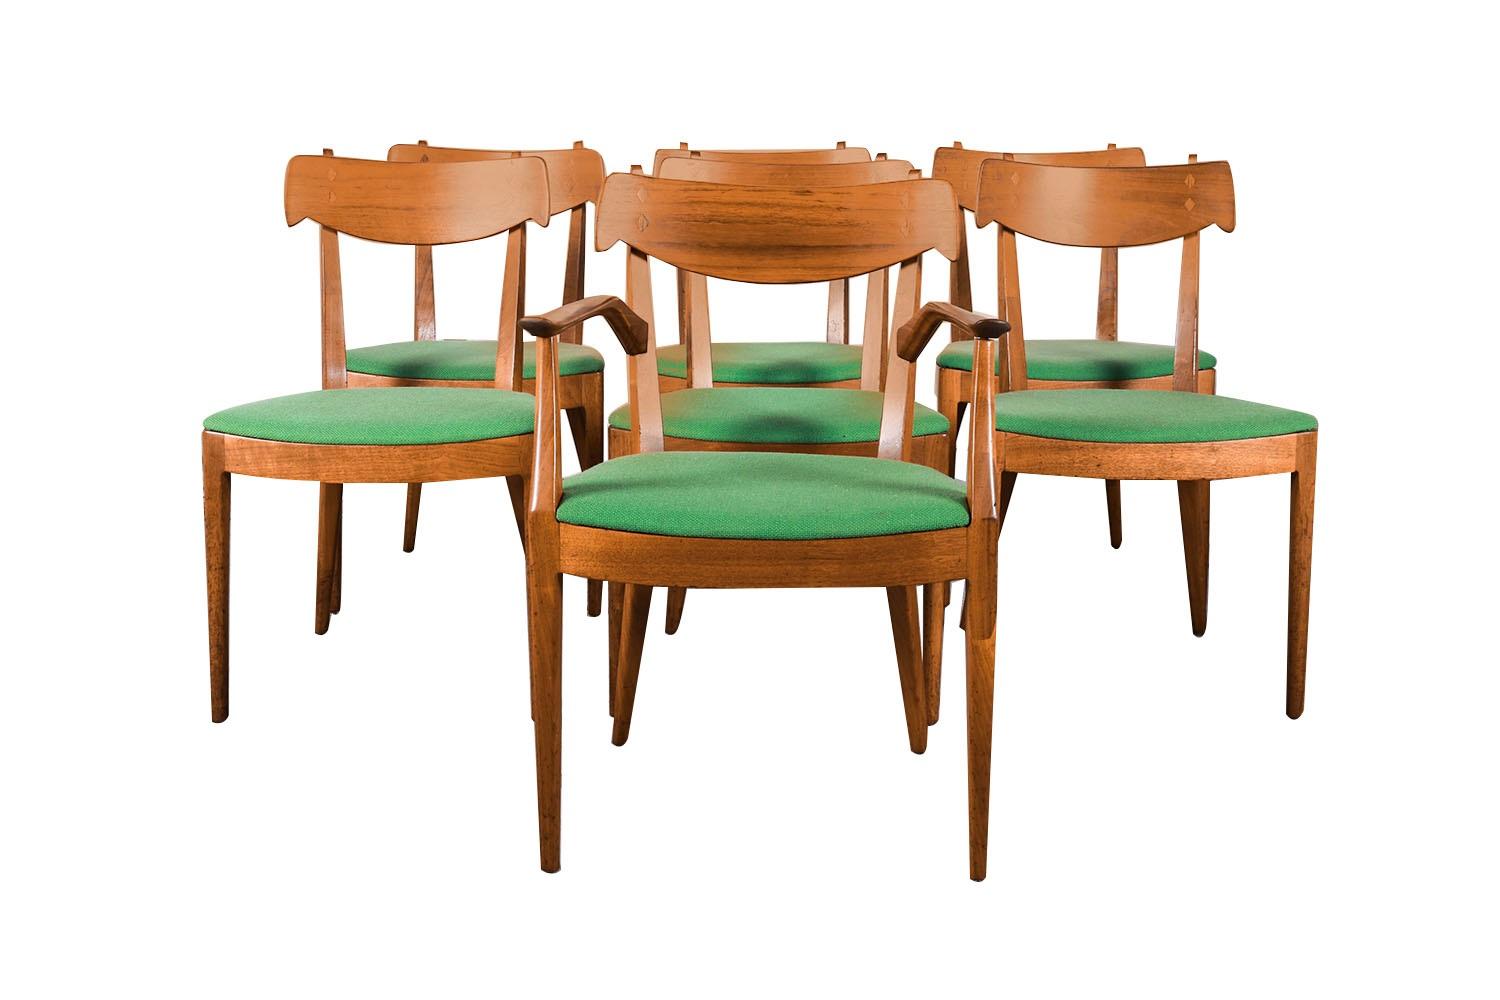 A set of seven extremely sought after, gorgeous 1960s, modern walnut side/dining chairs designed by Kipp Stewart and Stewart MacDougall for Drexel’s Declaration Collection, circa 1960’s. Featuring a full matching set of 7, 1 of which has arms, each